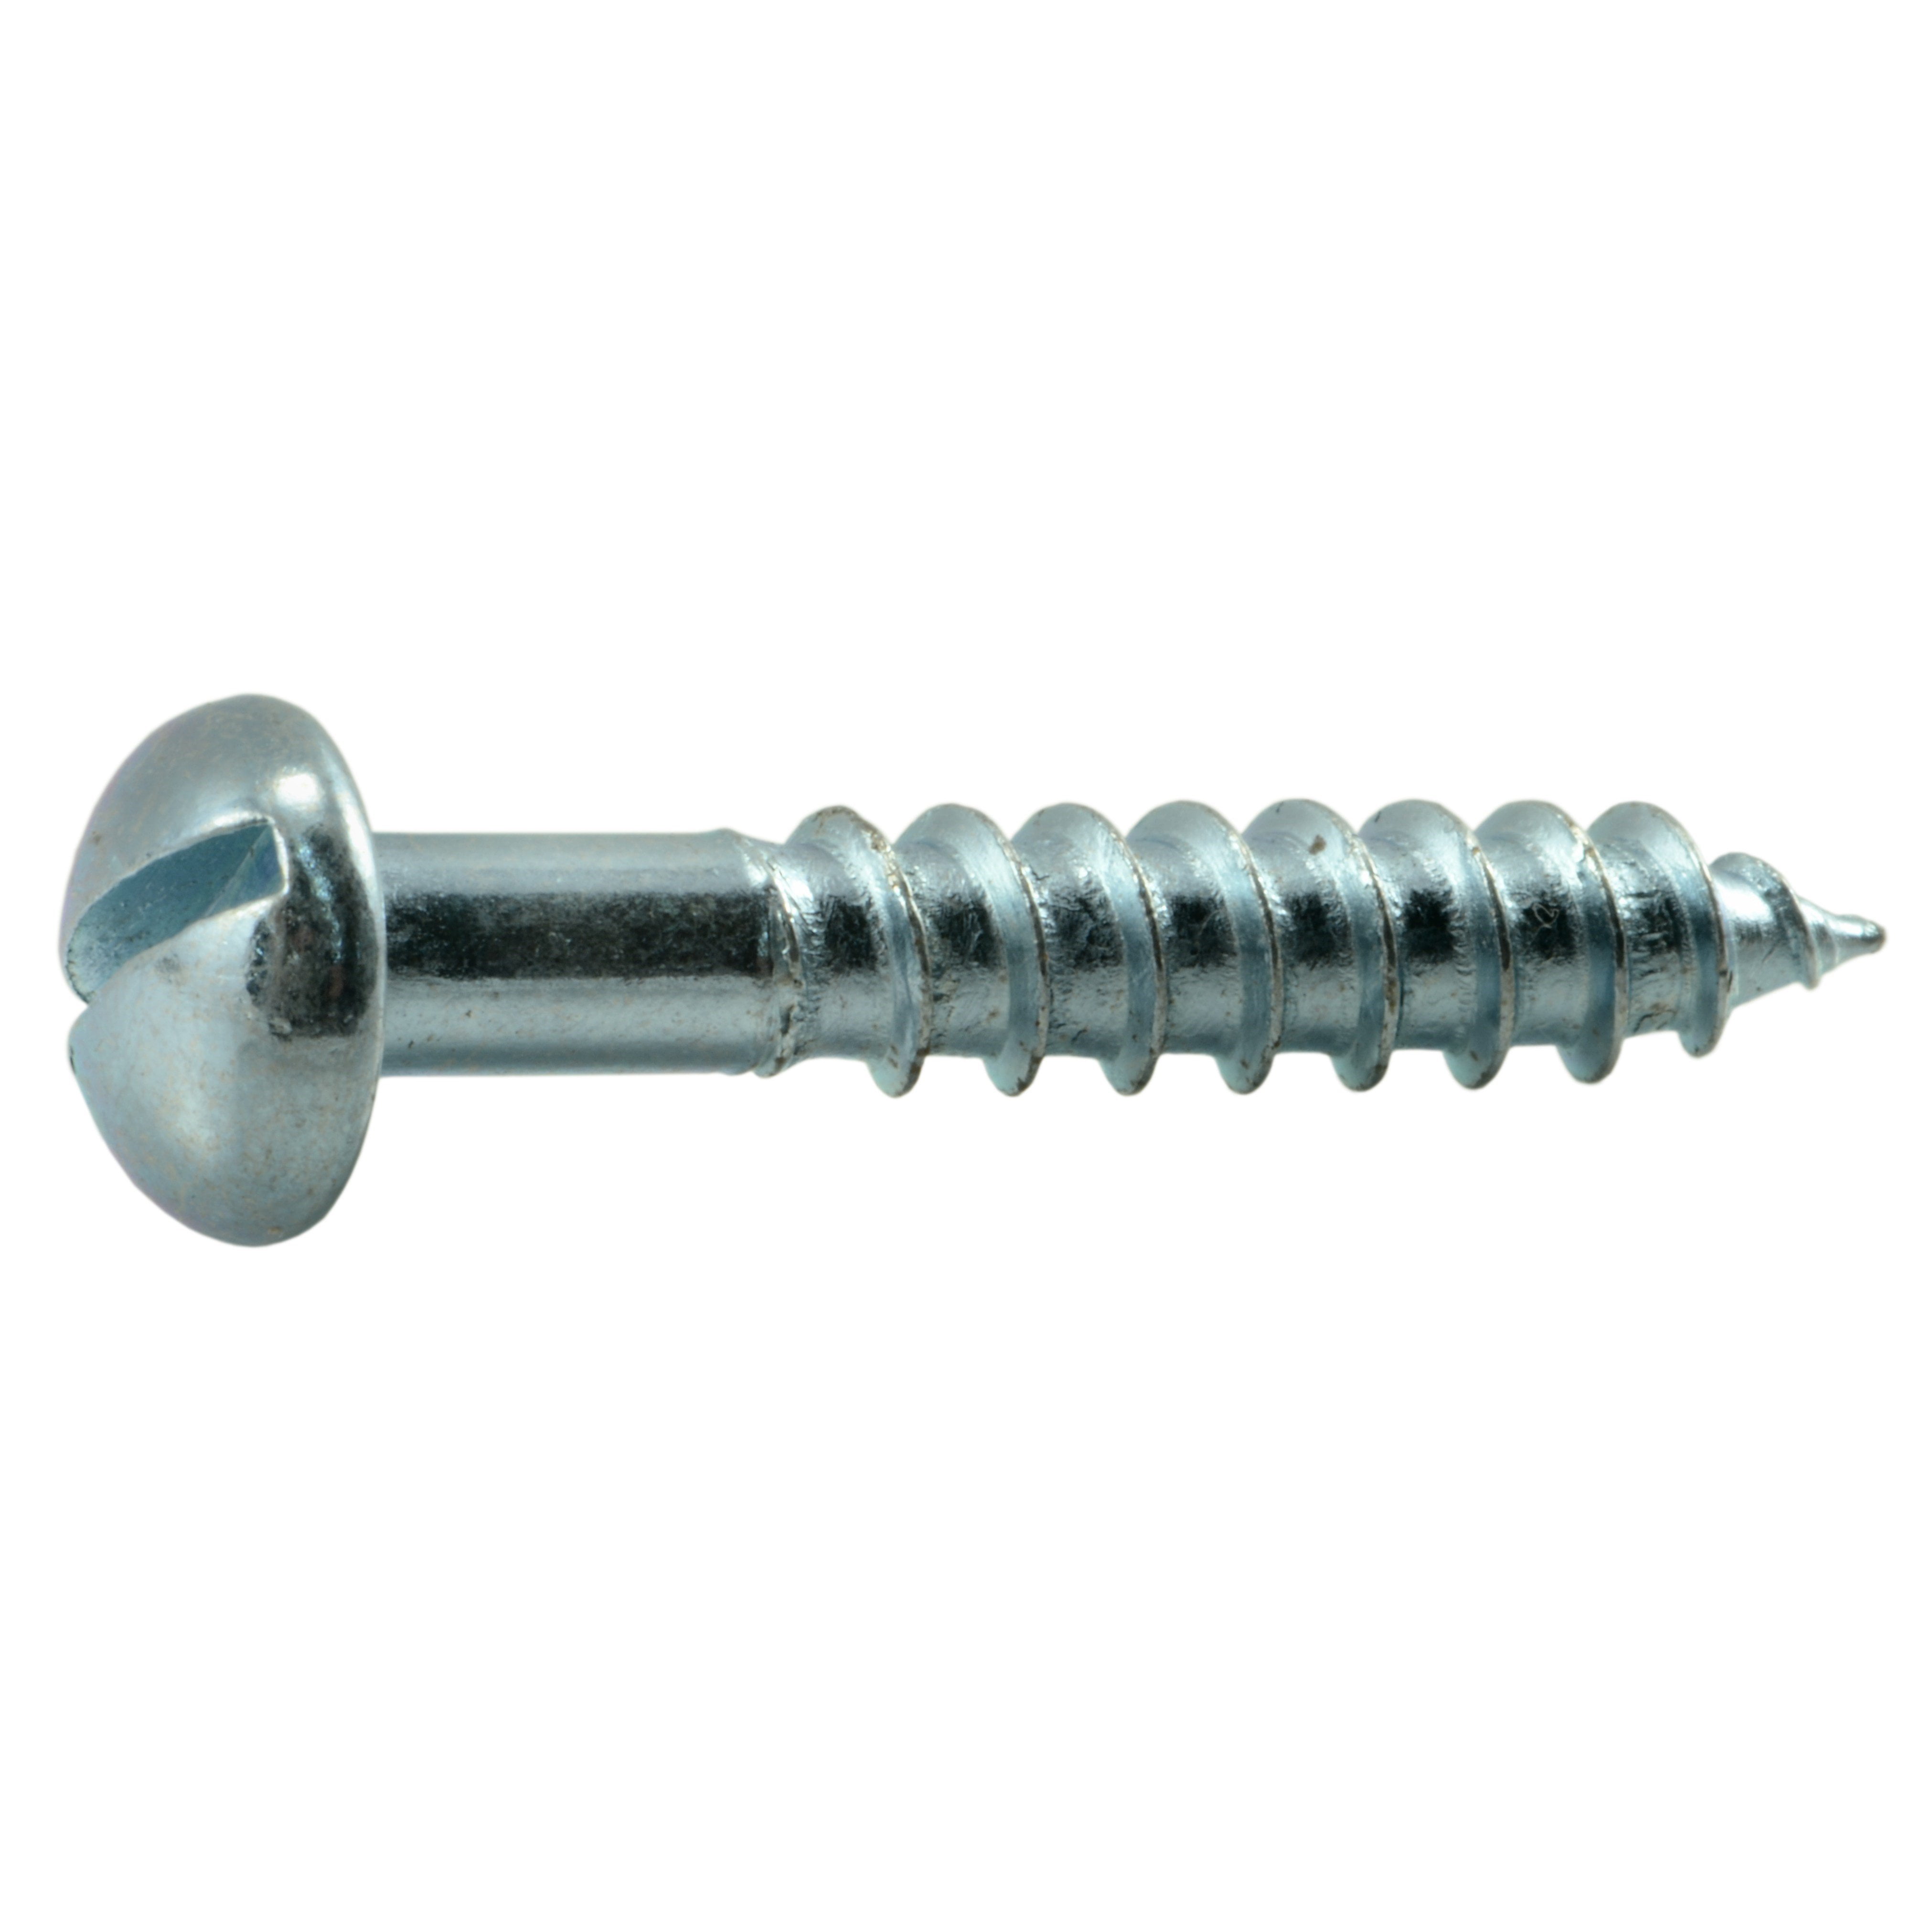 WOOD SCREW 4 X 1/2" SLOTTED ROUND HEAD PACK OF 50 ZINC PLATED STEEL 